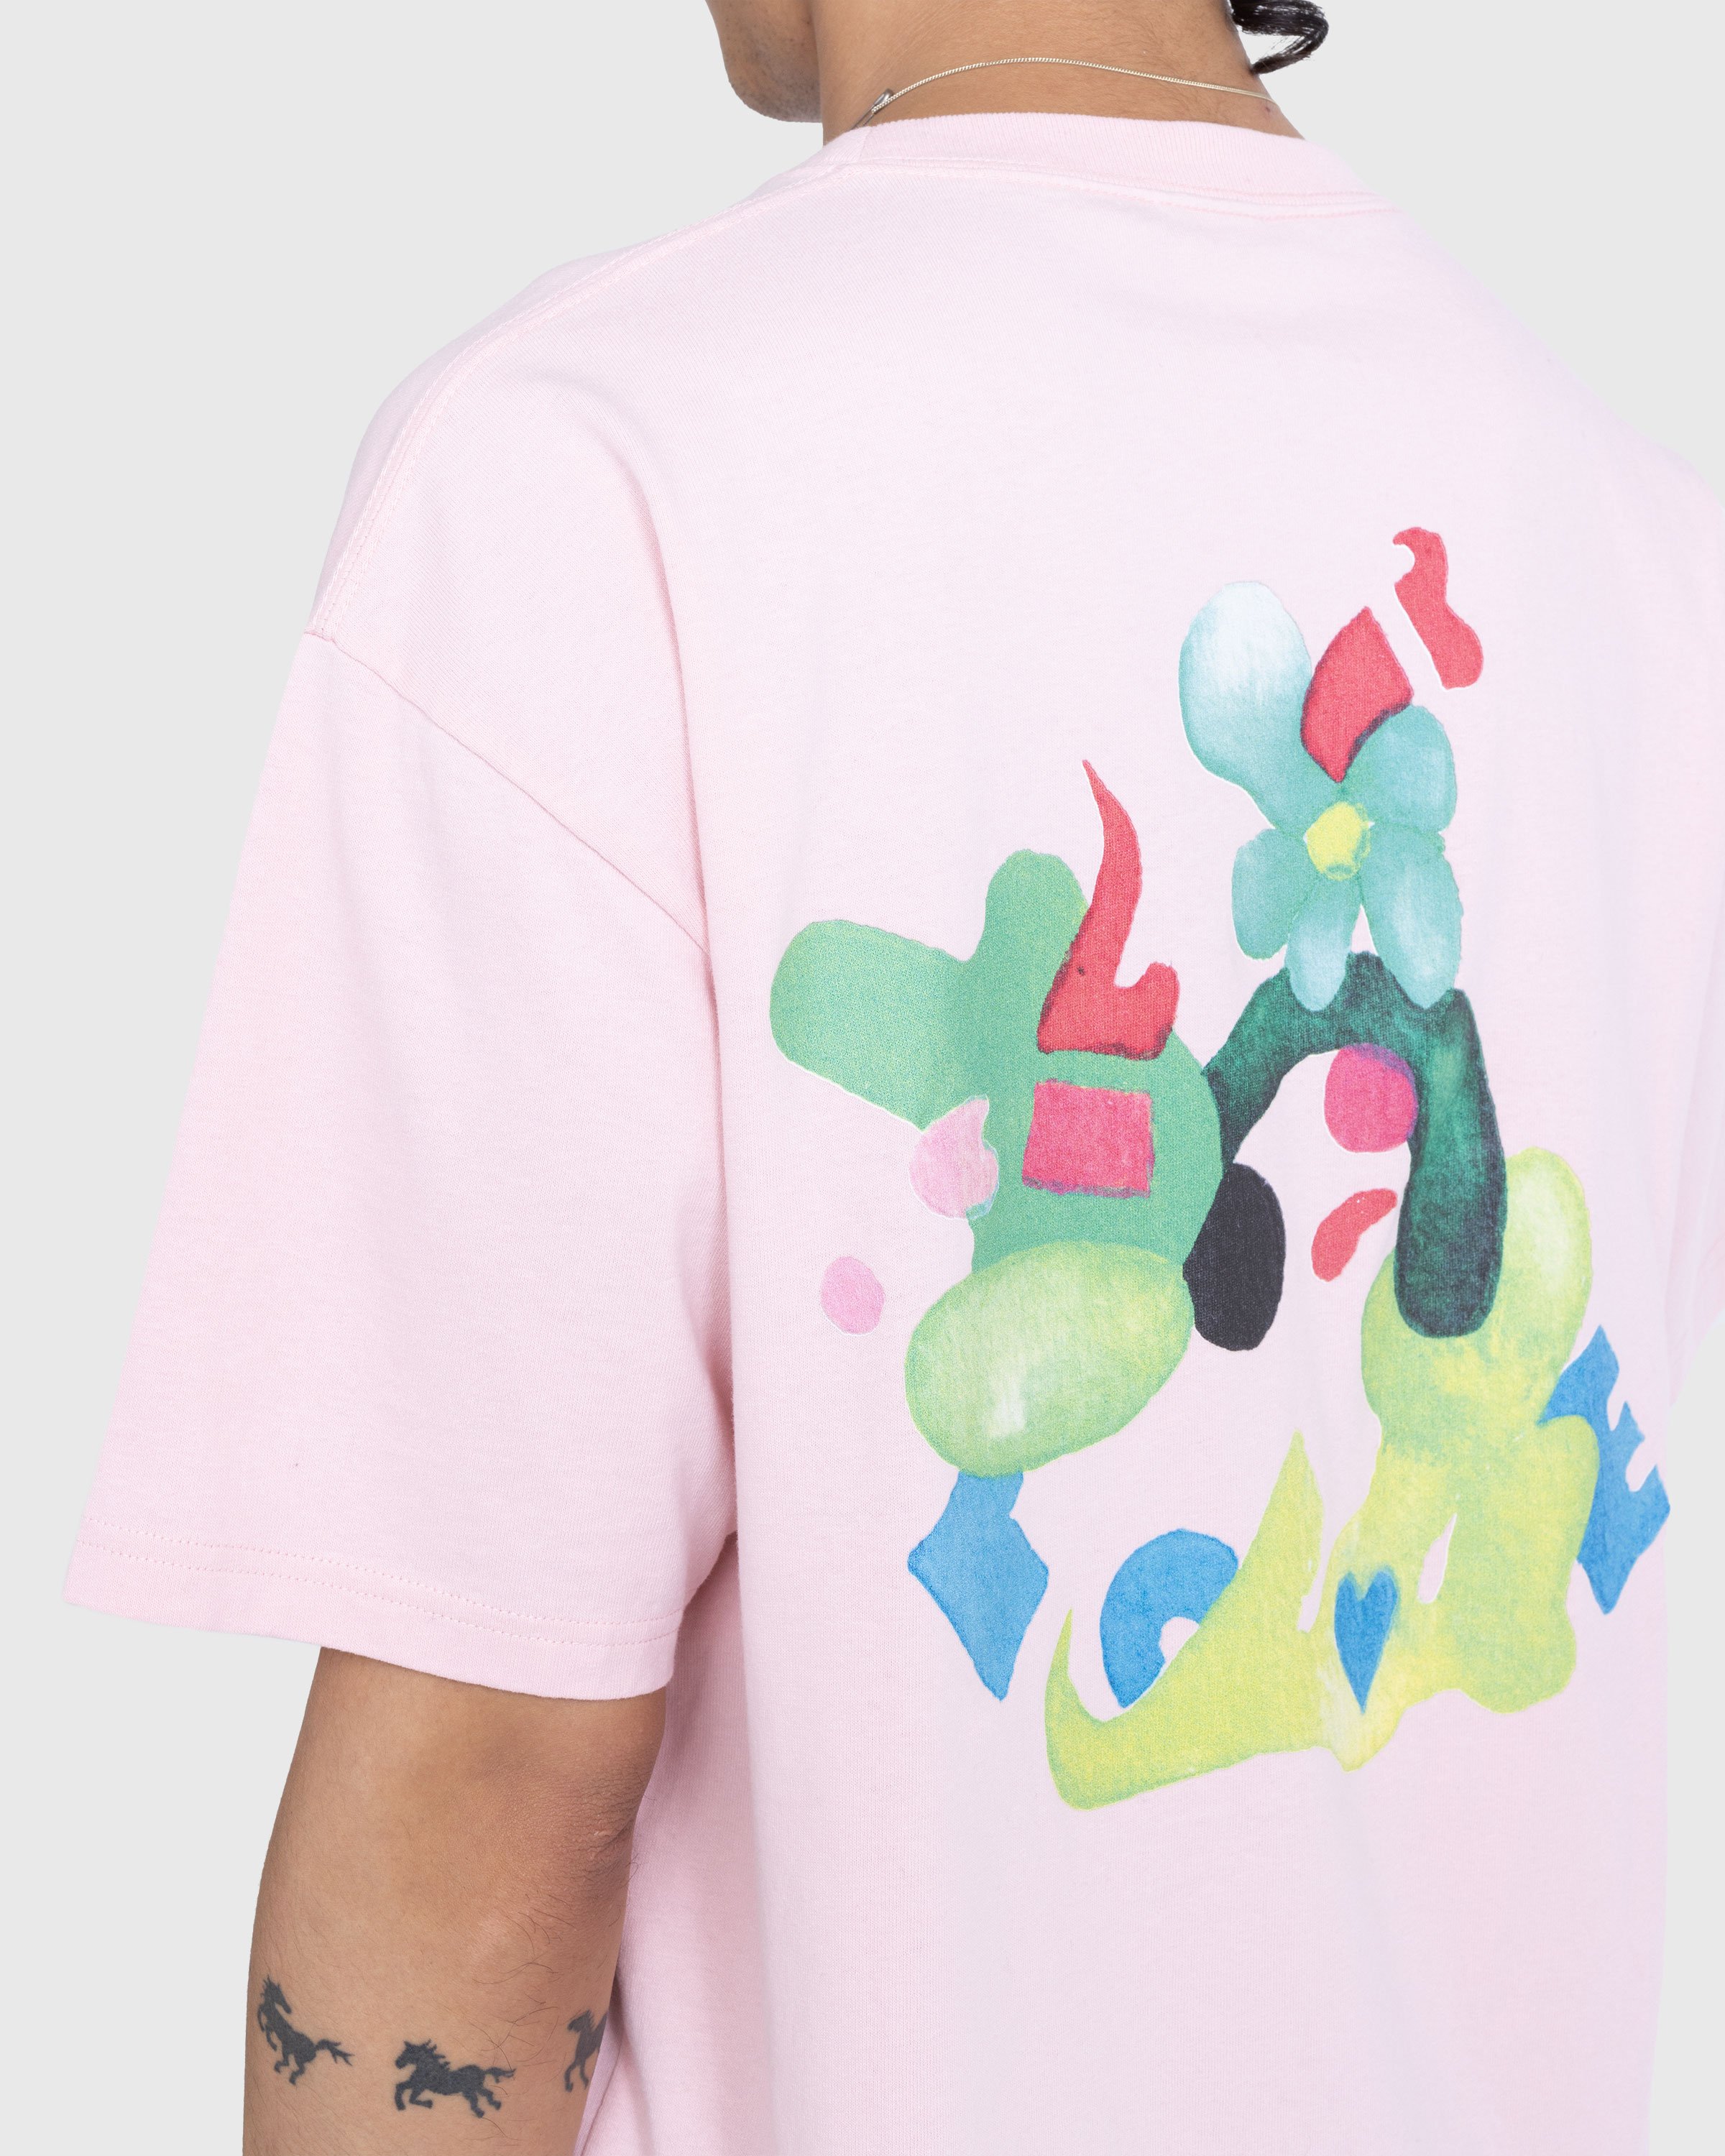 NTS x Highsnobiety - Graphic T-Shirt Pink - Clothing - Pink - Image 7